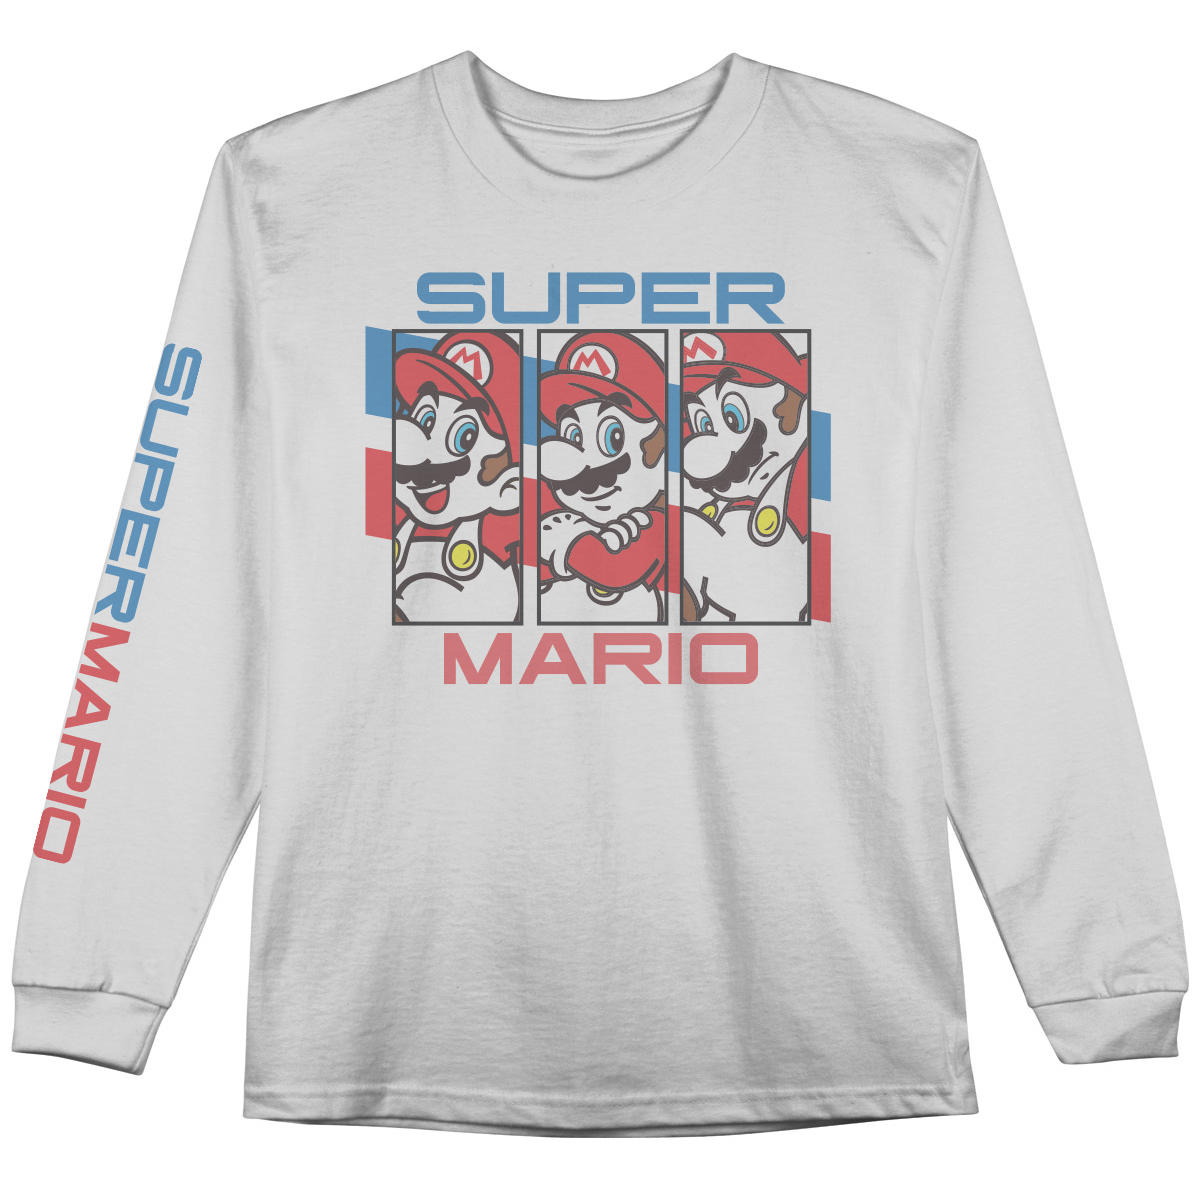 Super Mario Brothers Boys' Long-Sleeve Graphic Tee